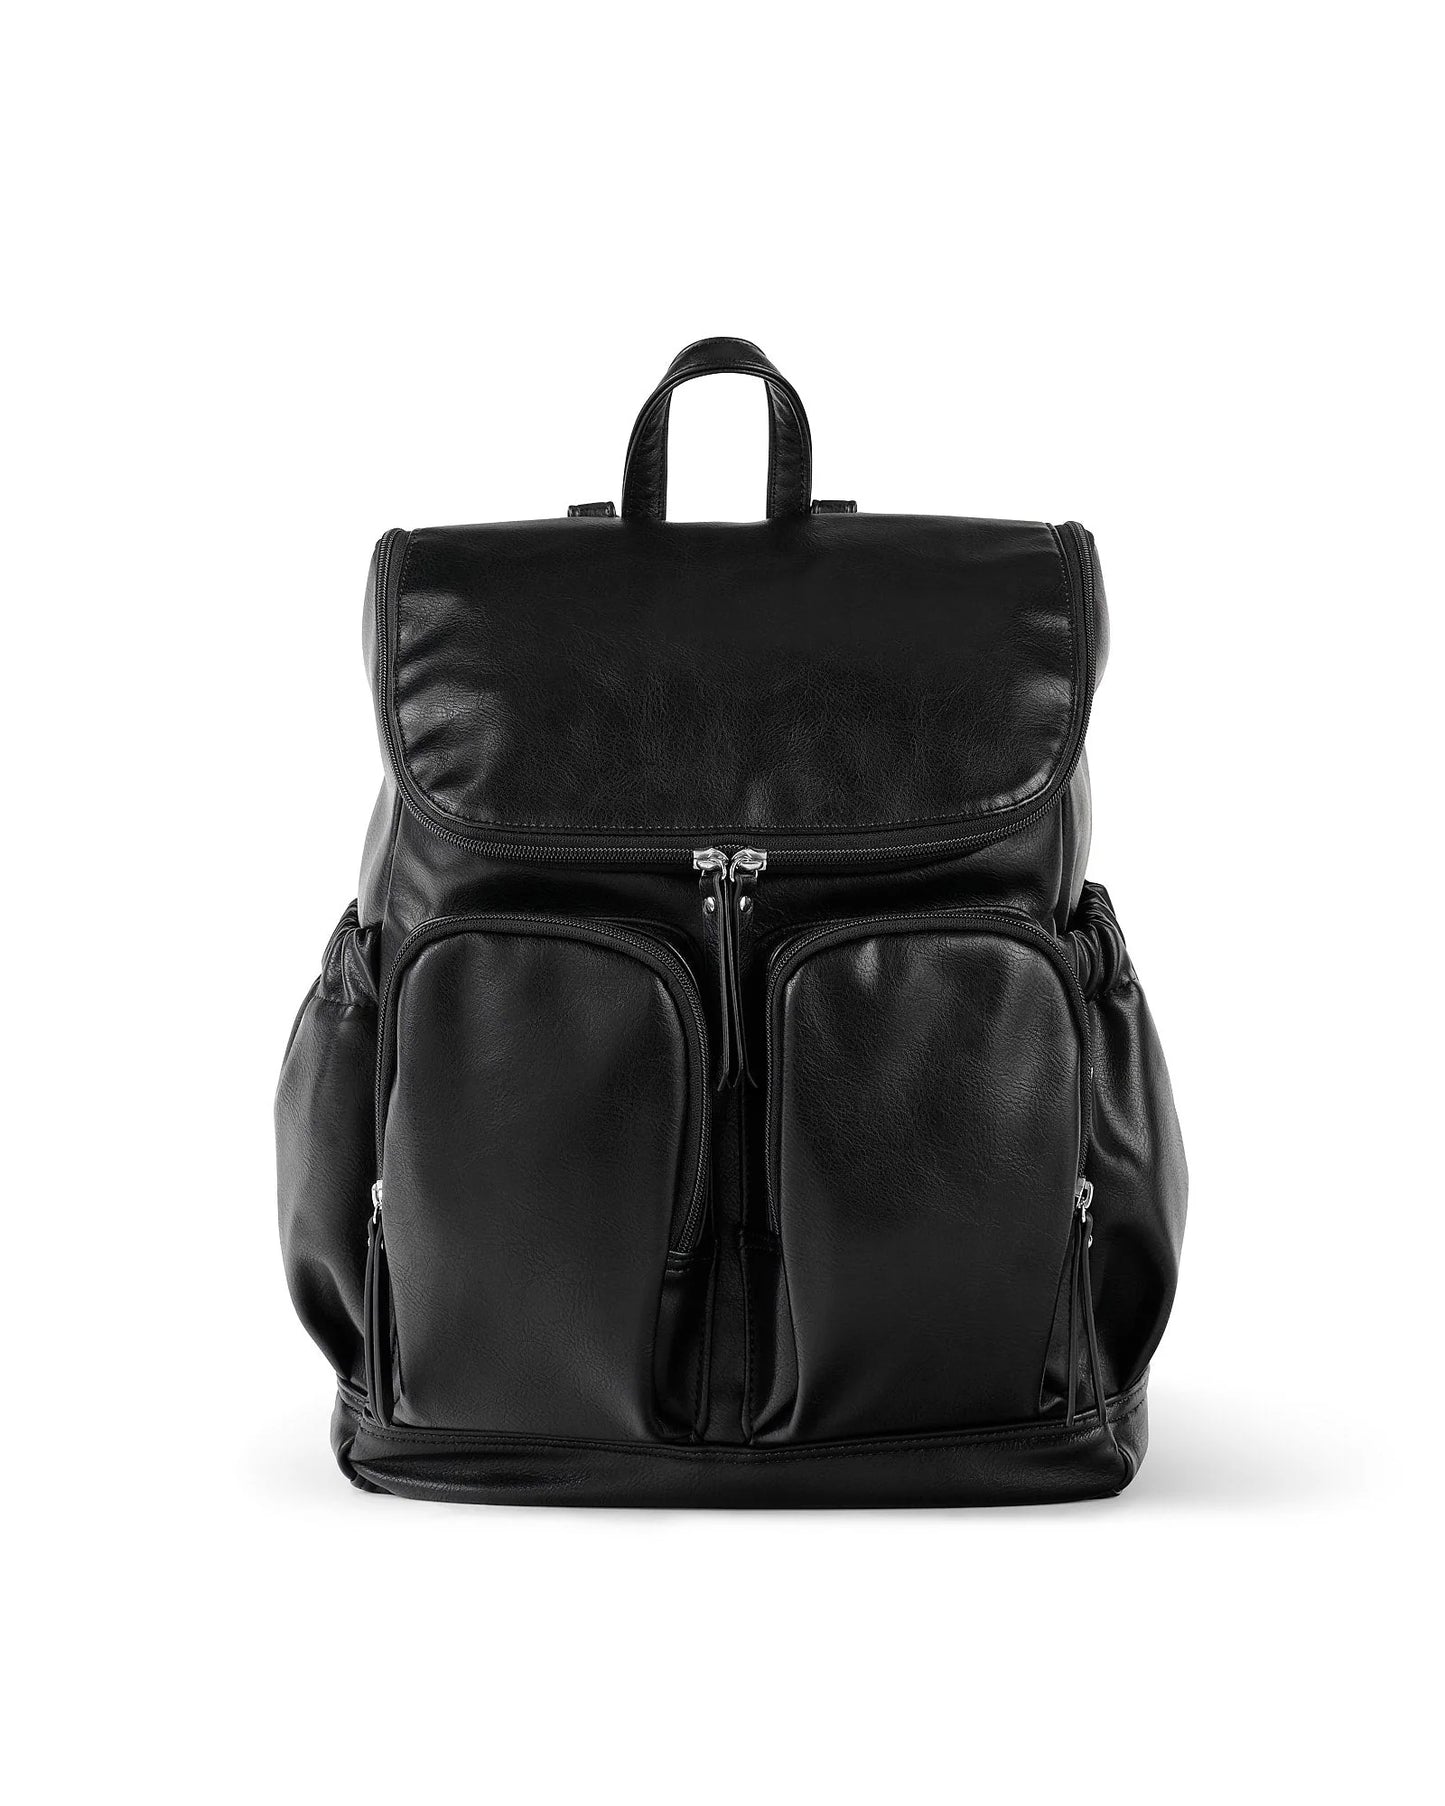 Backpack Black Faux Leather